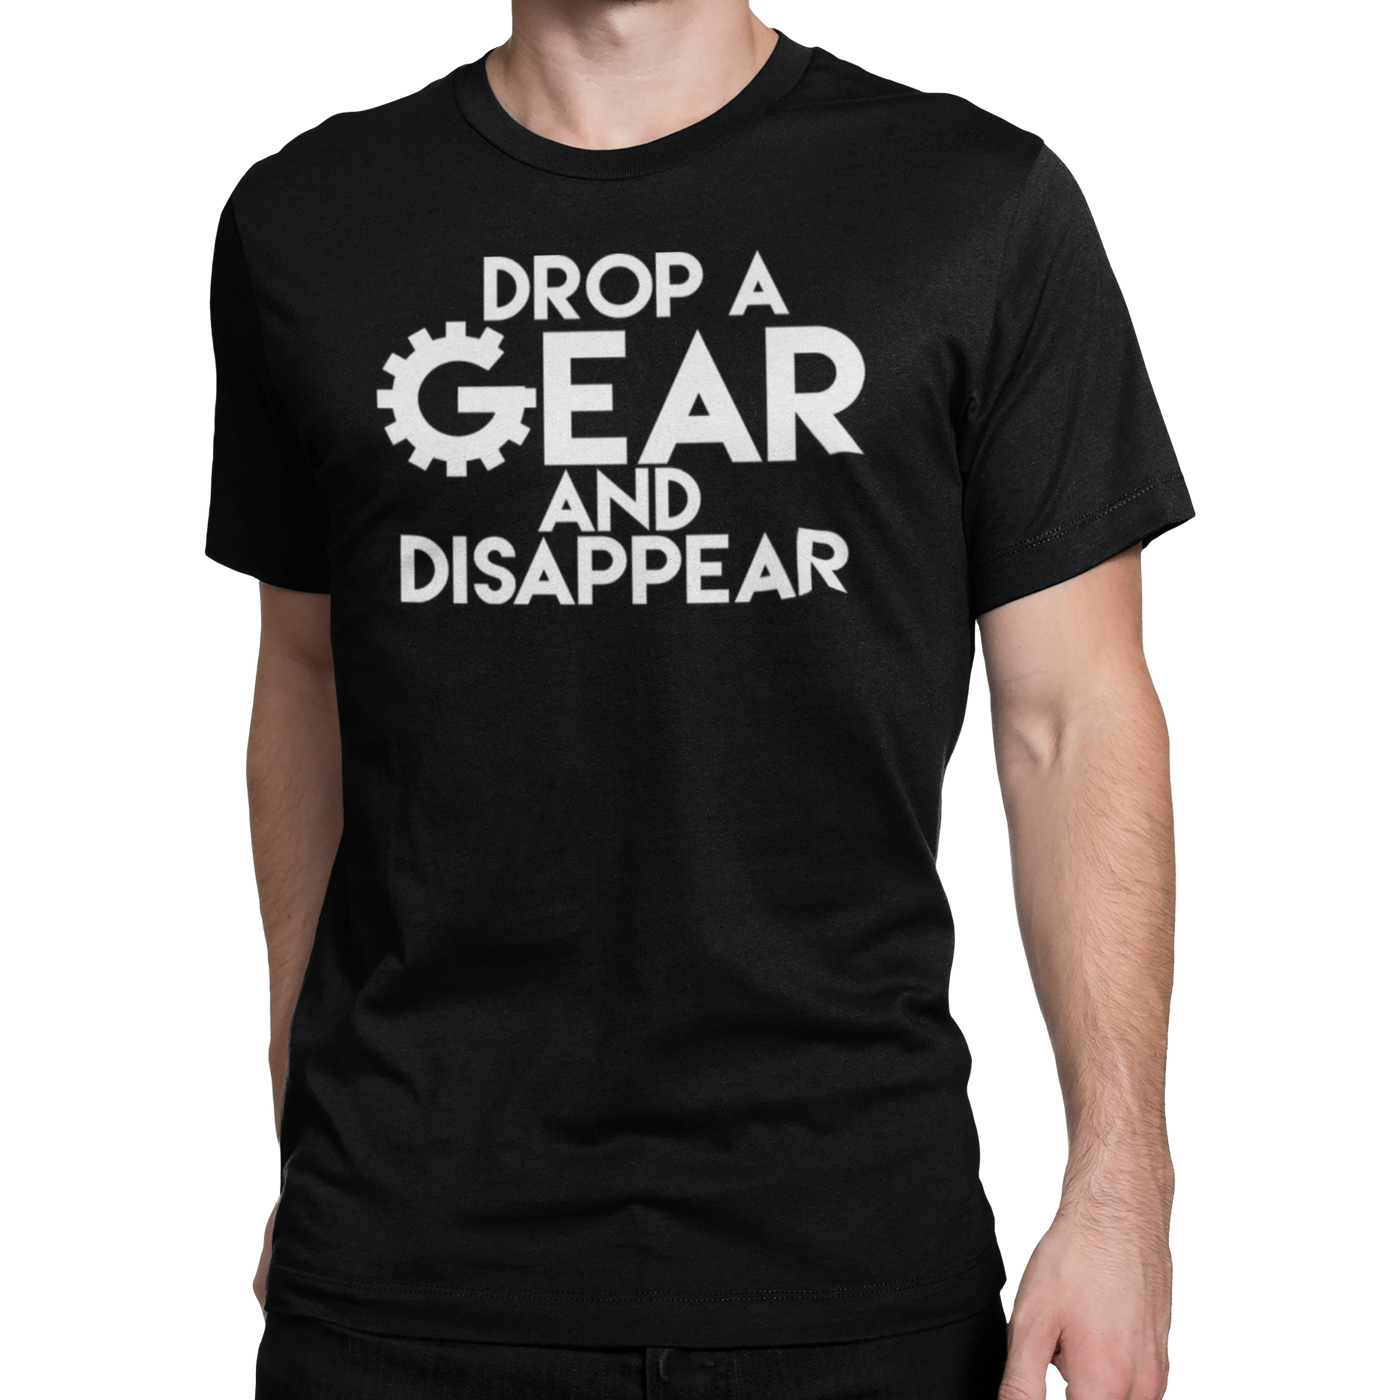 DROP A GEAR AND DISAPPEAR T-shirt